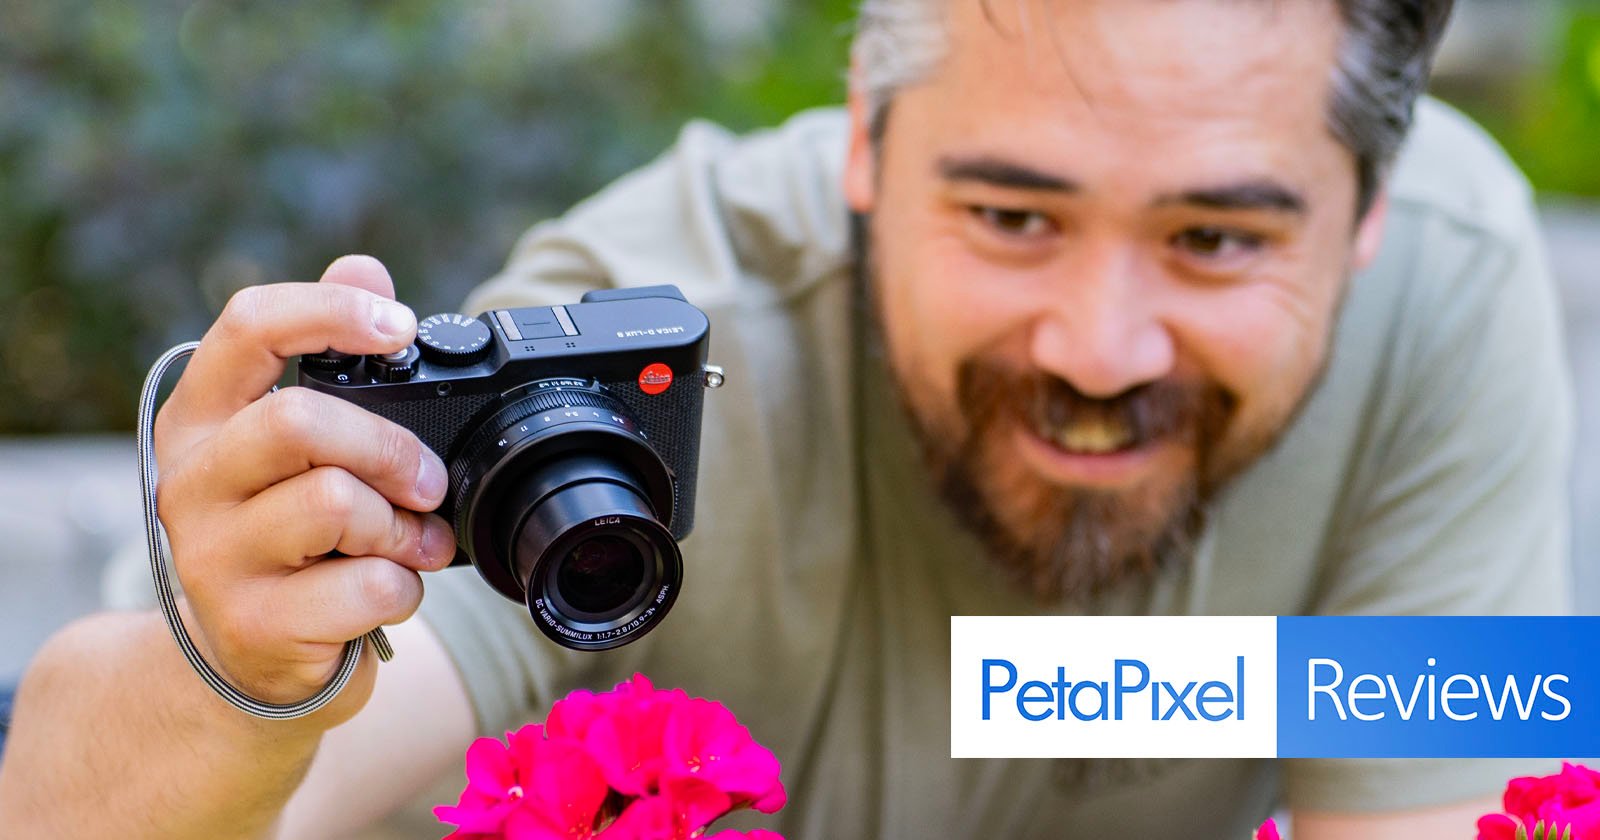 A man with a beard is smiling as he takes a close-up photo of pink flowers with a black camera. The background is blurred, highlighting the flowers and the photographer. There is an overlay with the text "PetaPixel Reviews" at the bottom right corner.